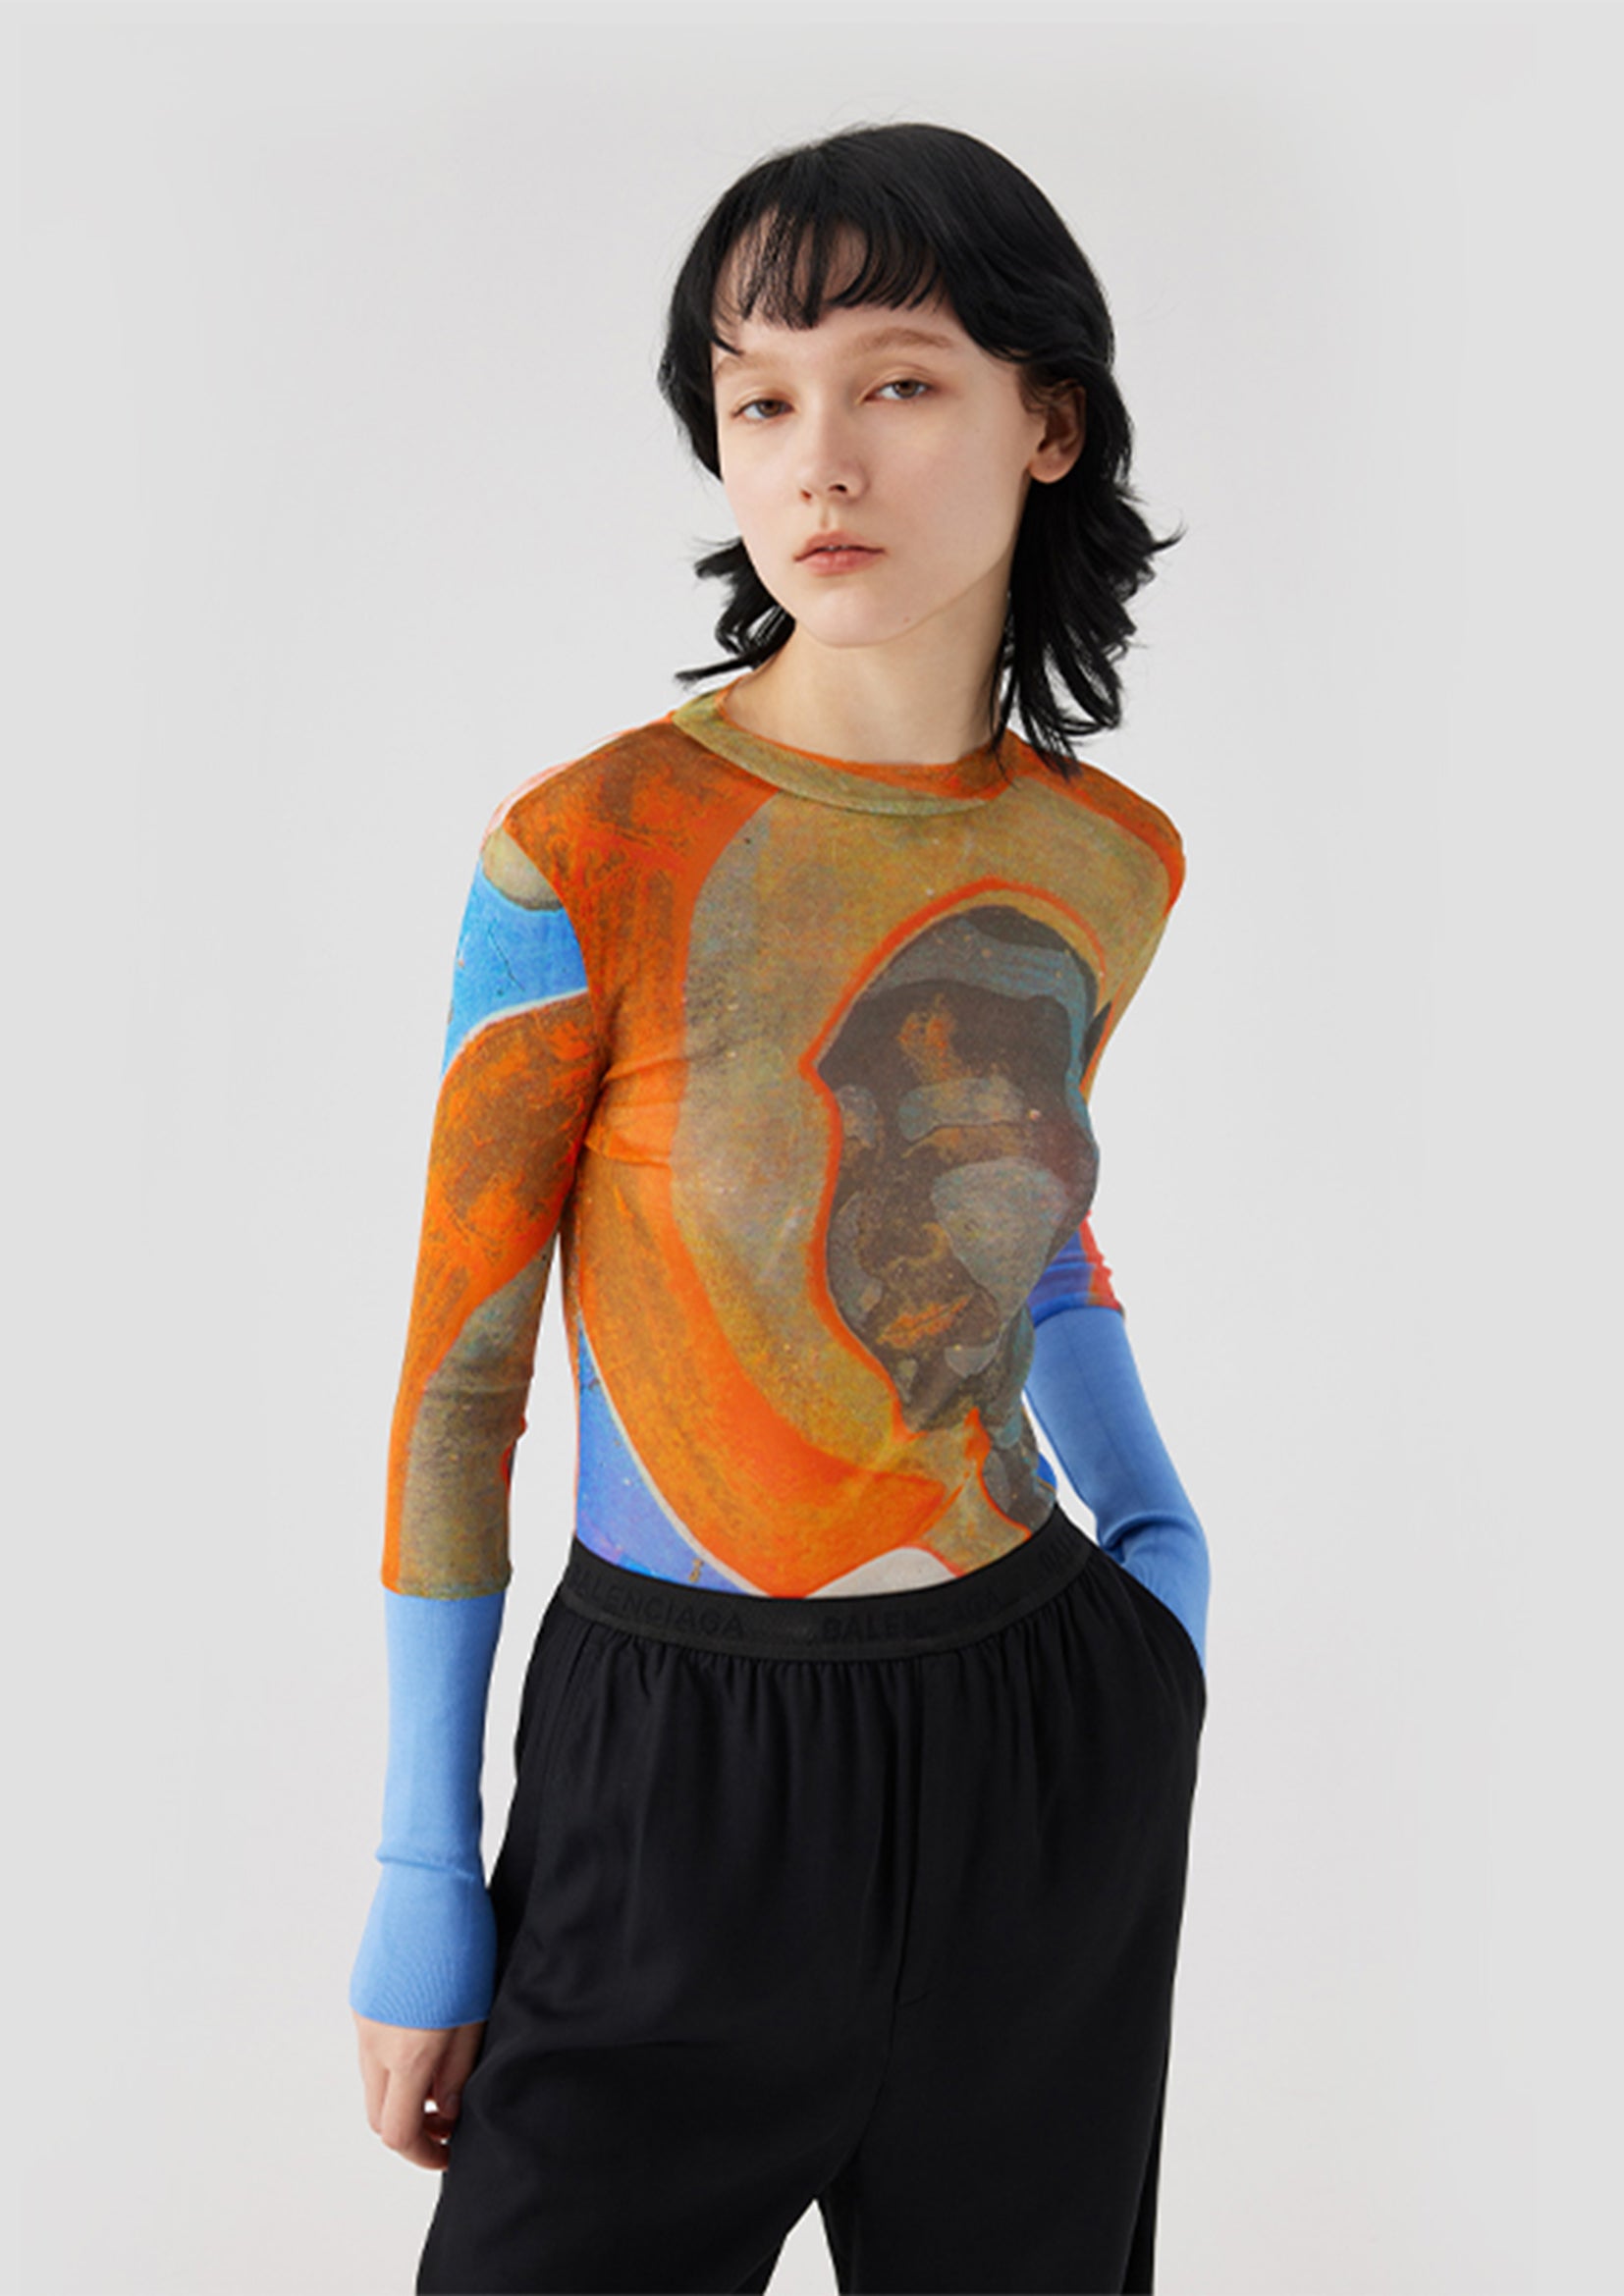 Abstractionism see-through mesh top